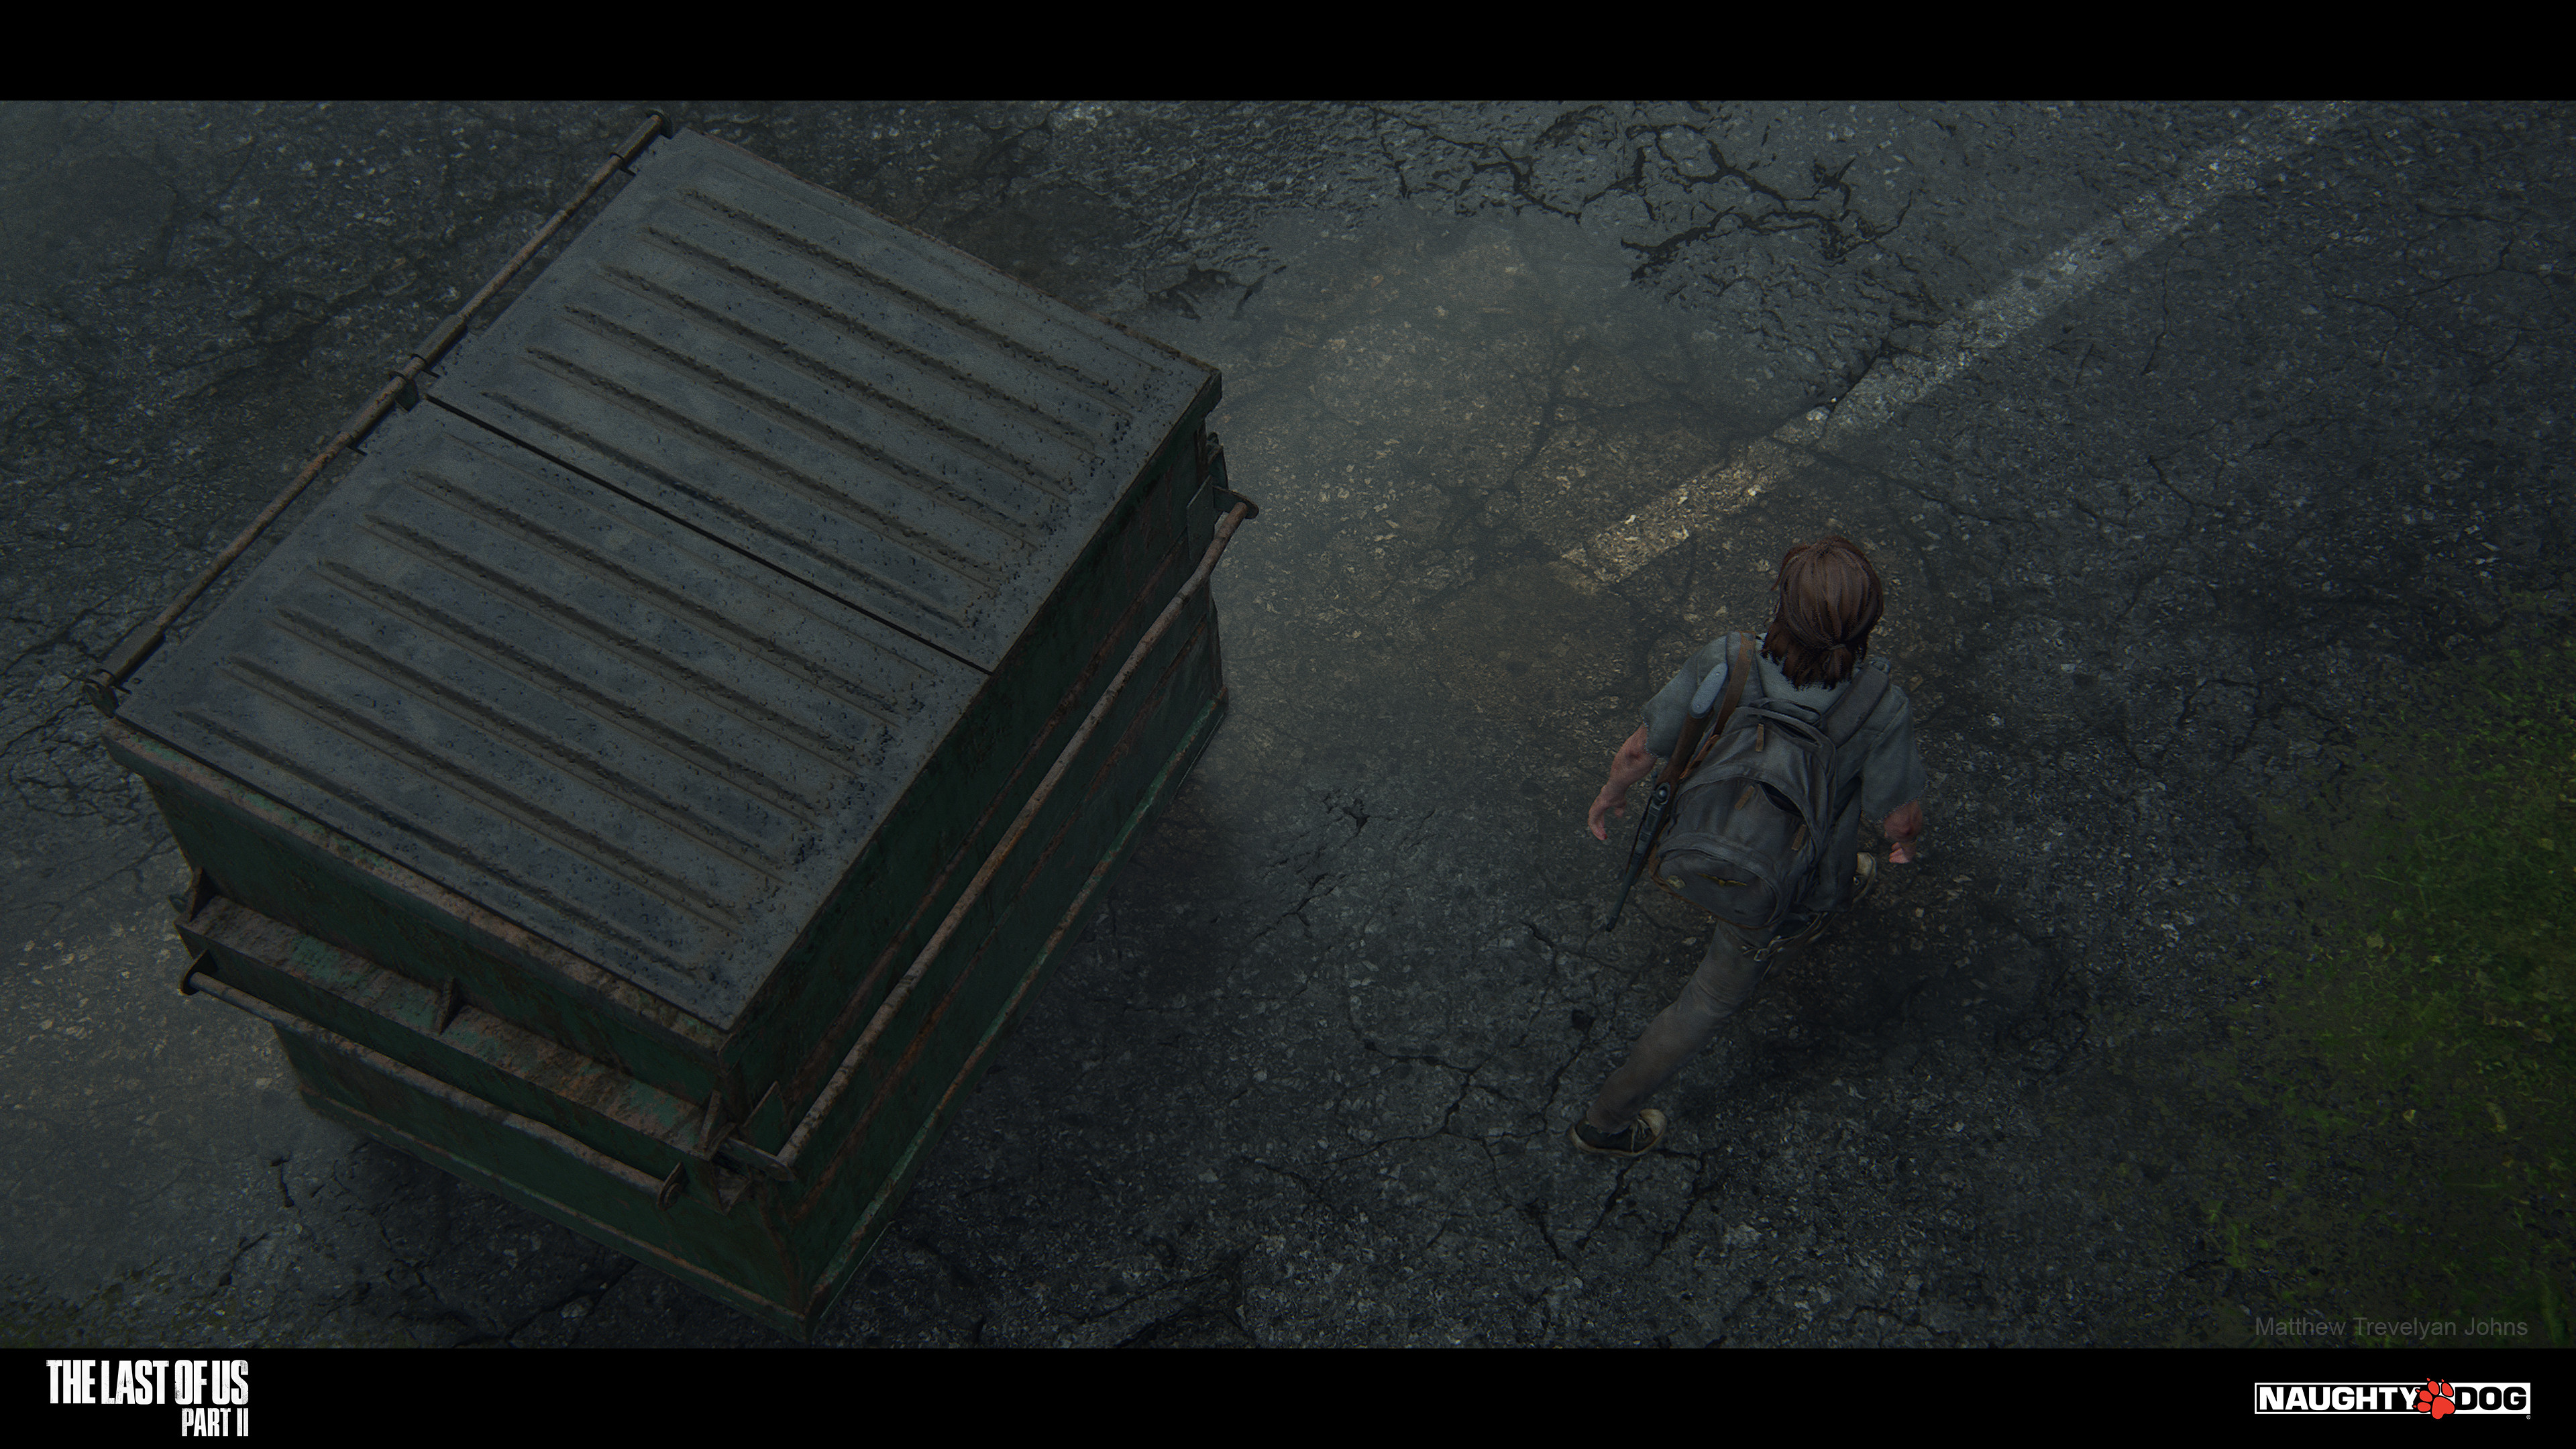 I was responsible for the baking, texturing and shading of the 'Last of Us Dumpsters' as well as working on the wetness response and puddles on the asphalt in this particular shot